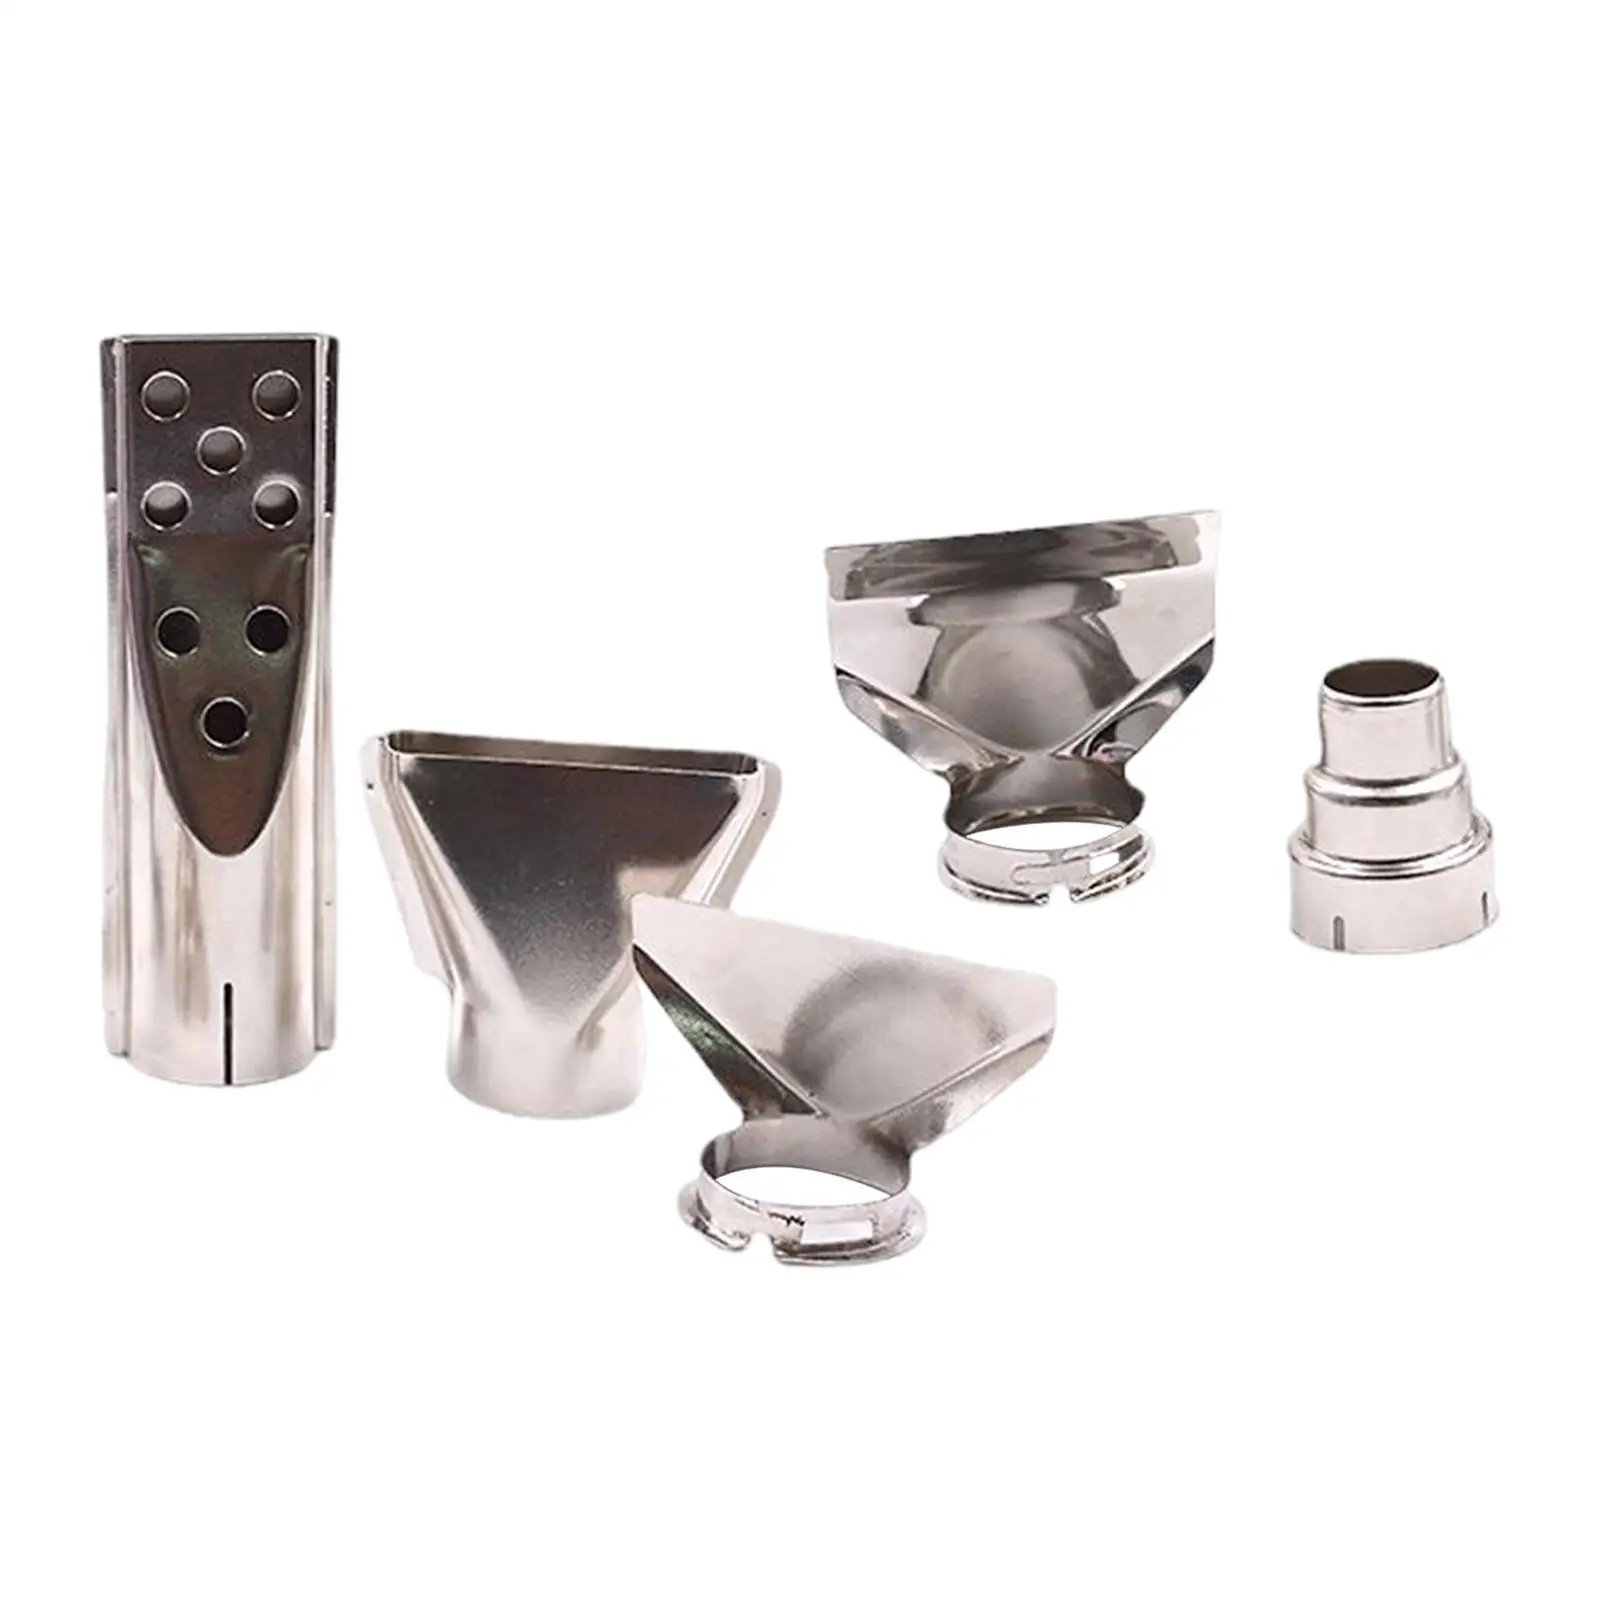 Heat Nozzle Attachments Steel Nozzles Hot Air Blower Tools Shrink Wrap for Shrink Tube Use